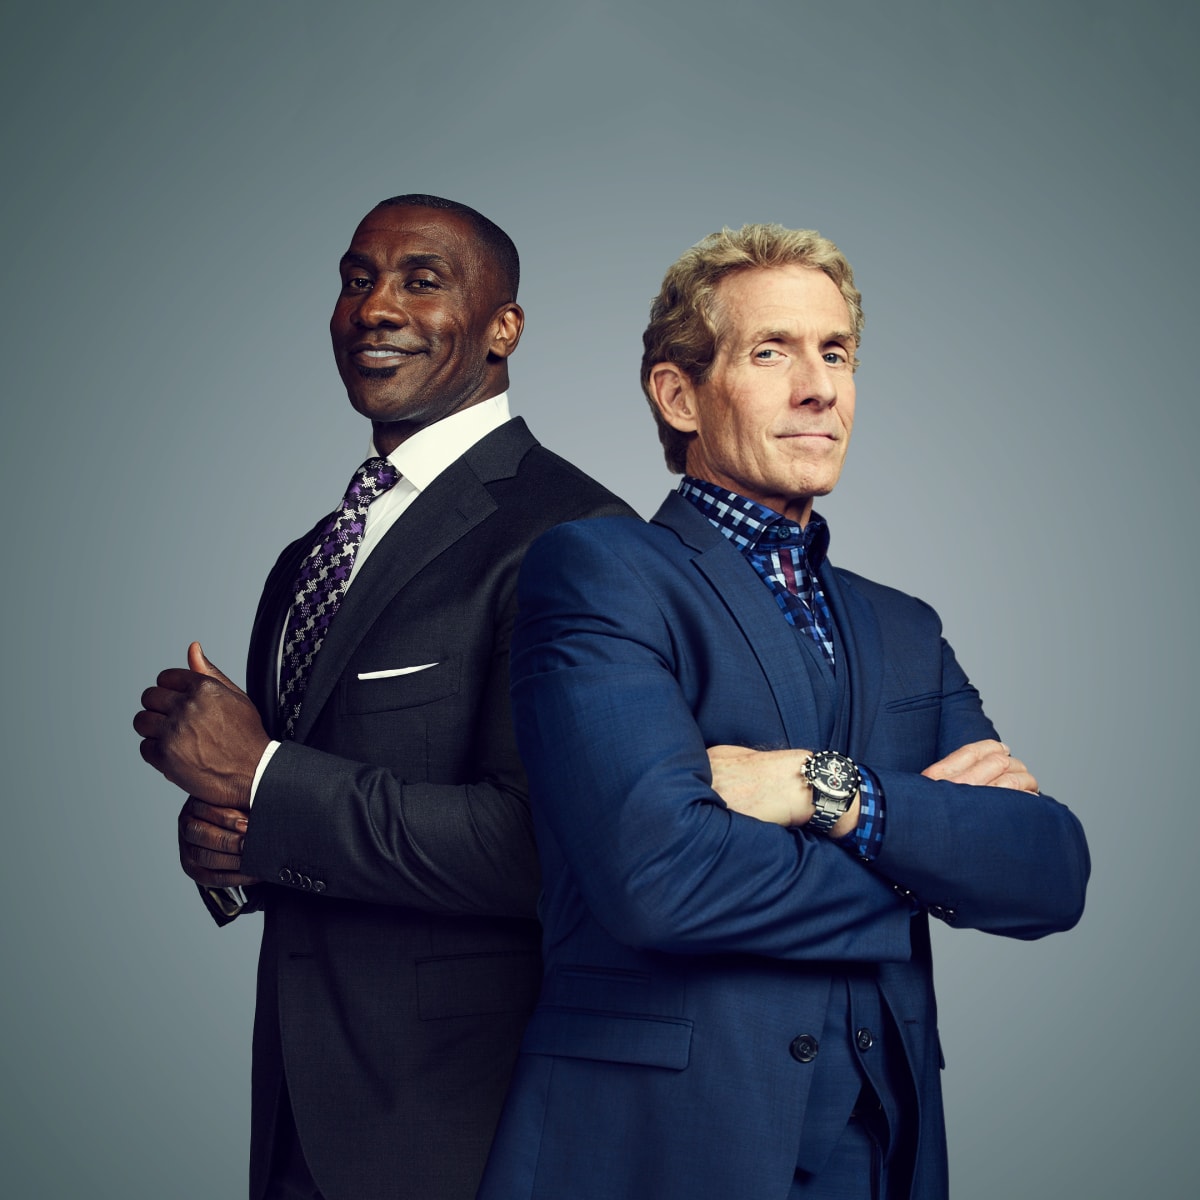 Skip Bayless And Shannon Sharpe Feud: Why Are They Fighting? Shannon Sharpe Meme Explained